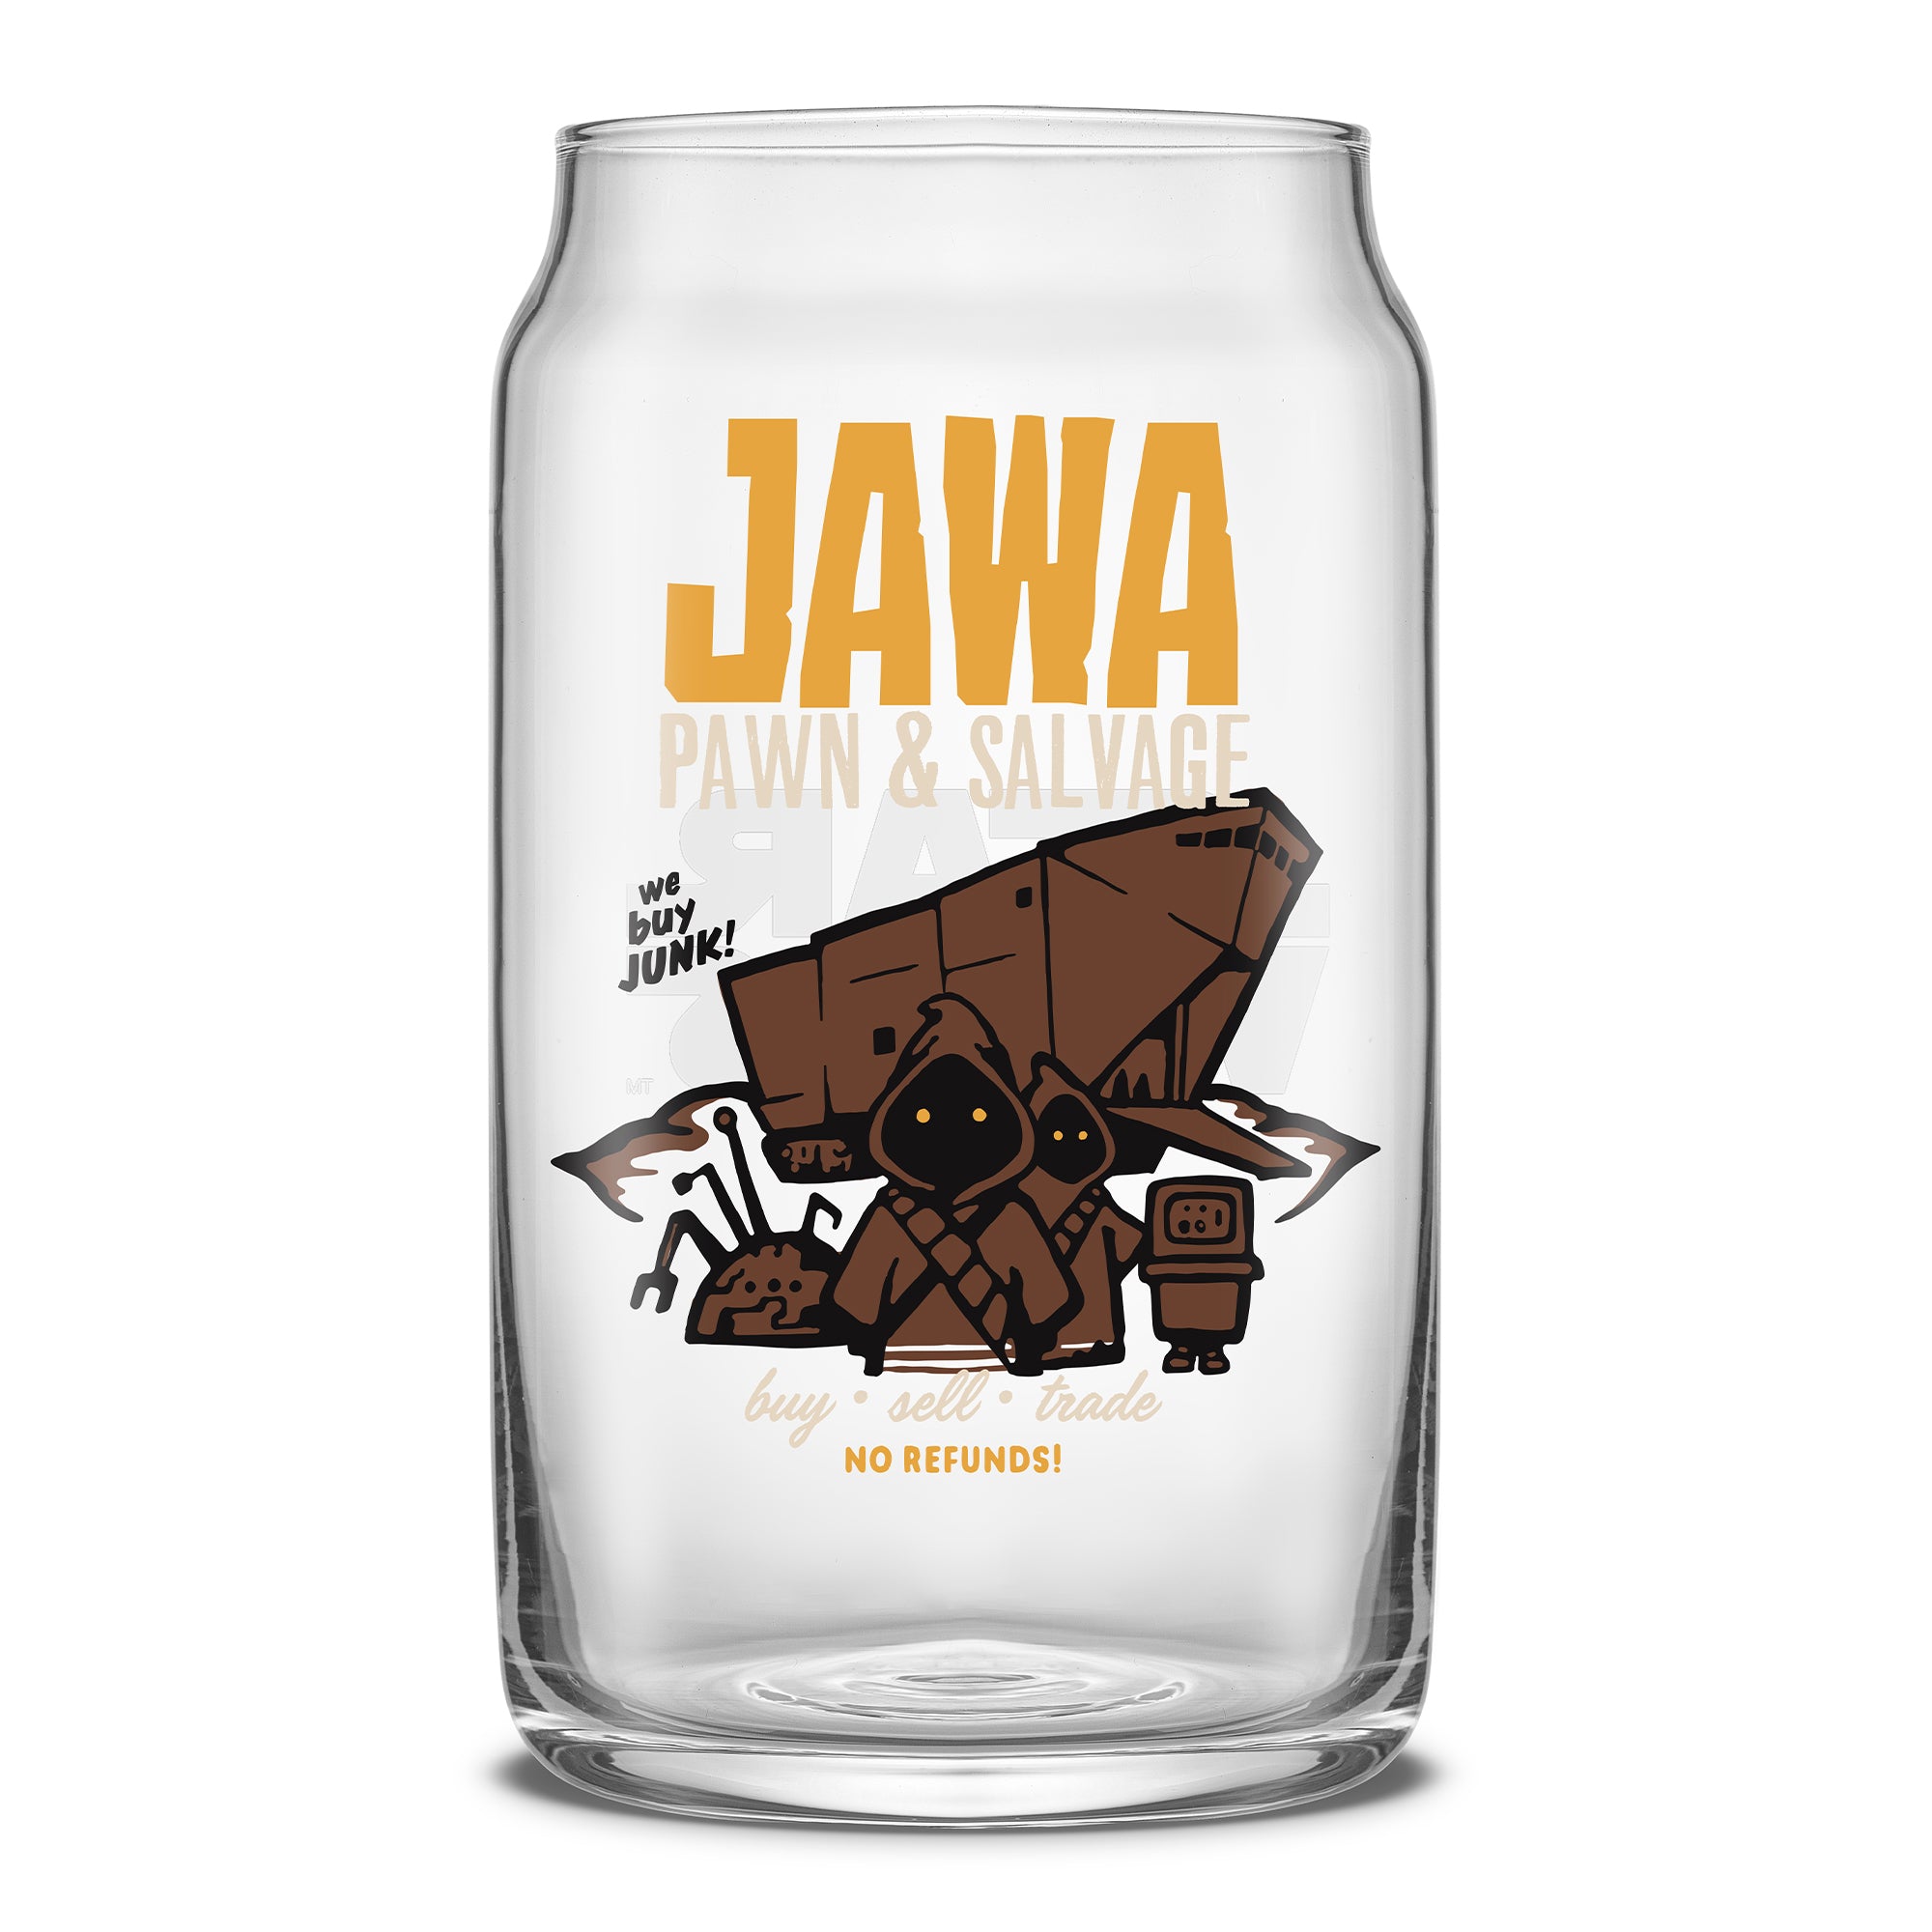 Retro-inspired Star Wars can-shaped drinking glasses featuring Jawa.